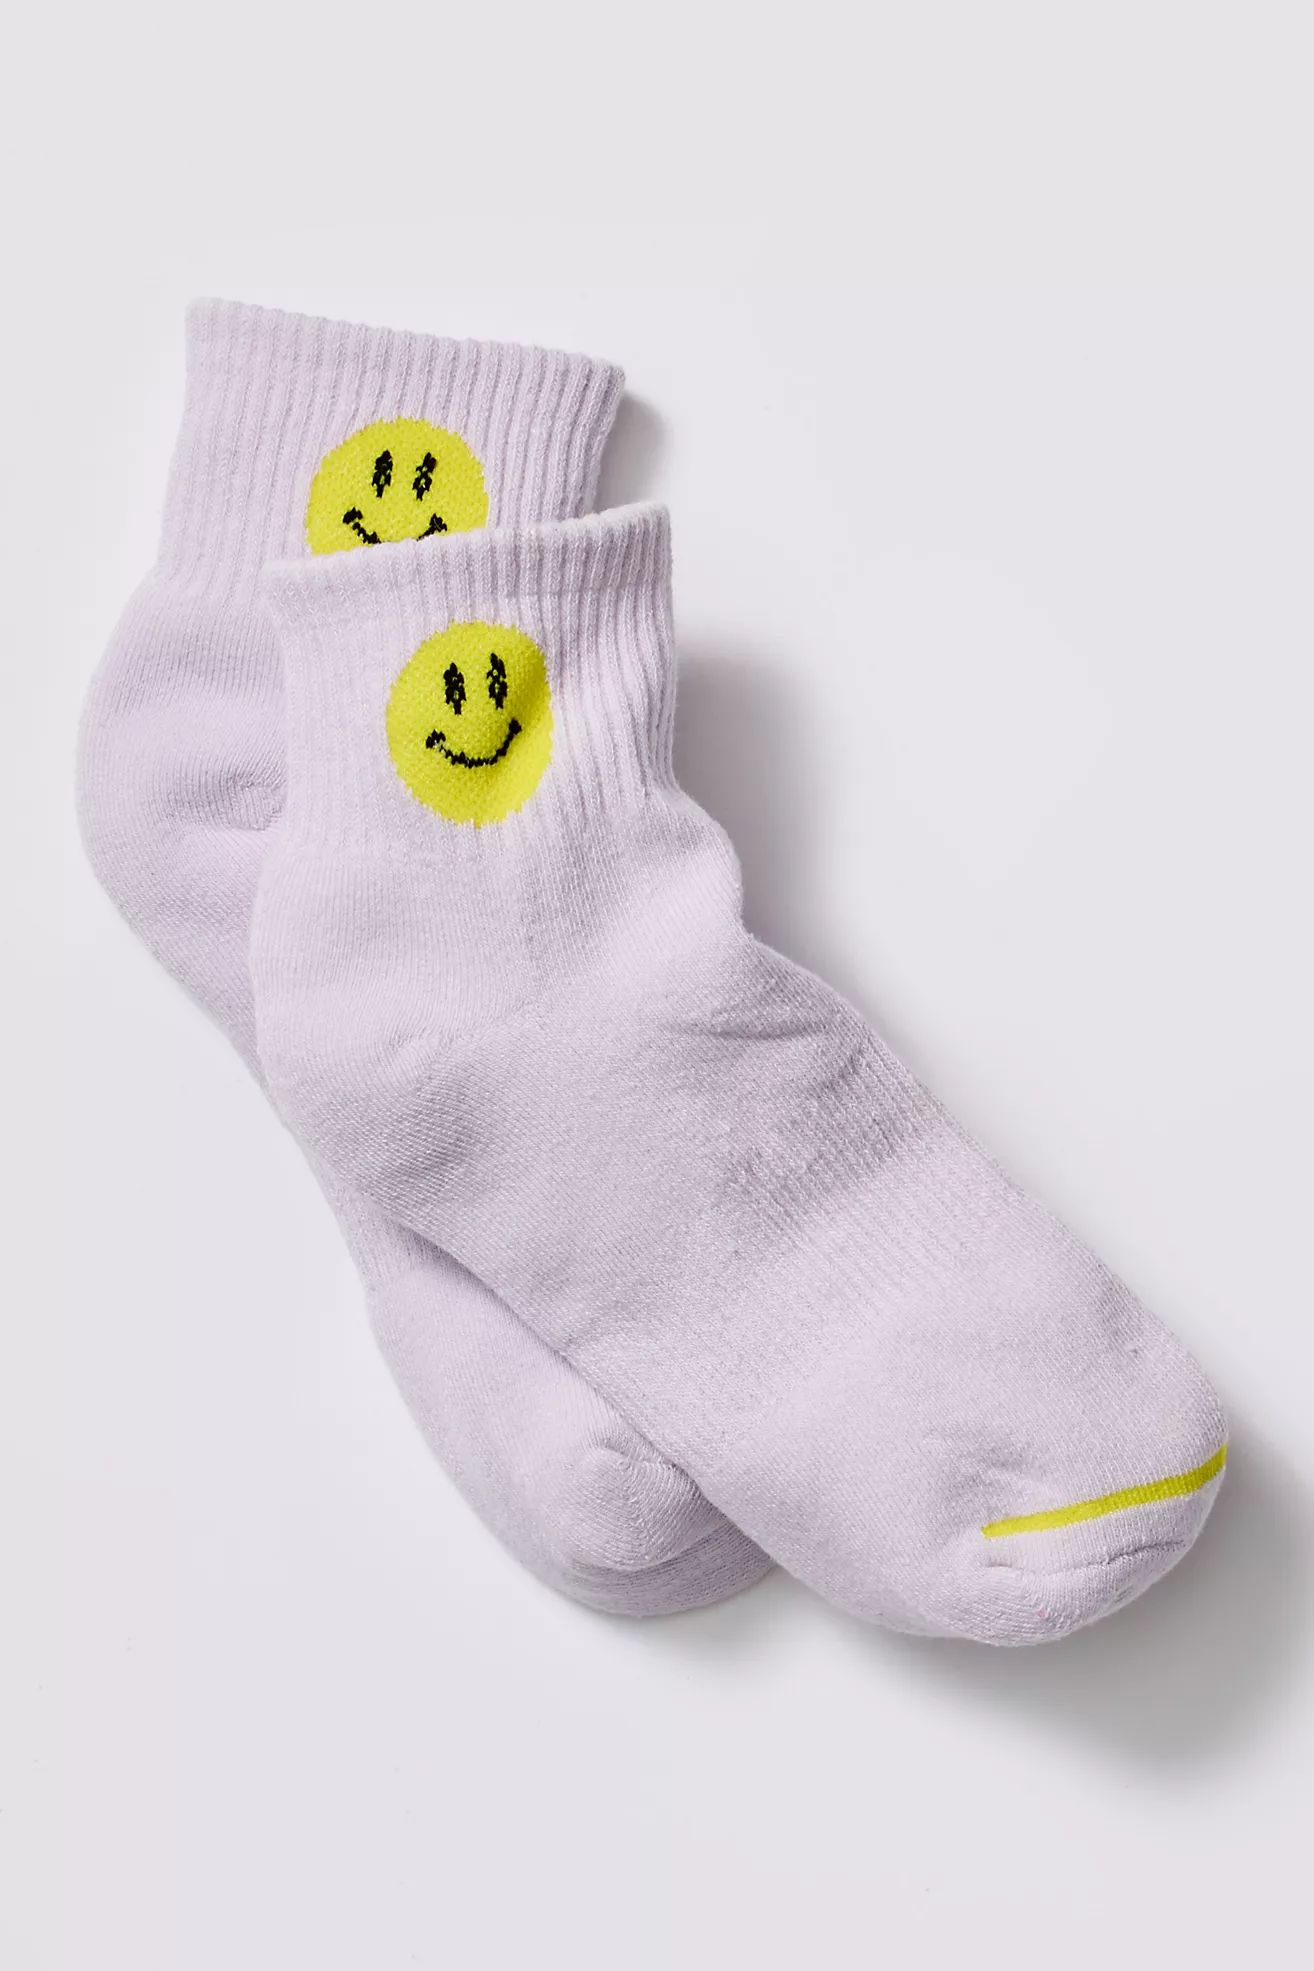 Movement Smiling Buti Ankle Socks | Free People (Global - UK&FR Excluded)